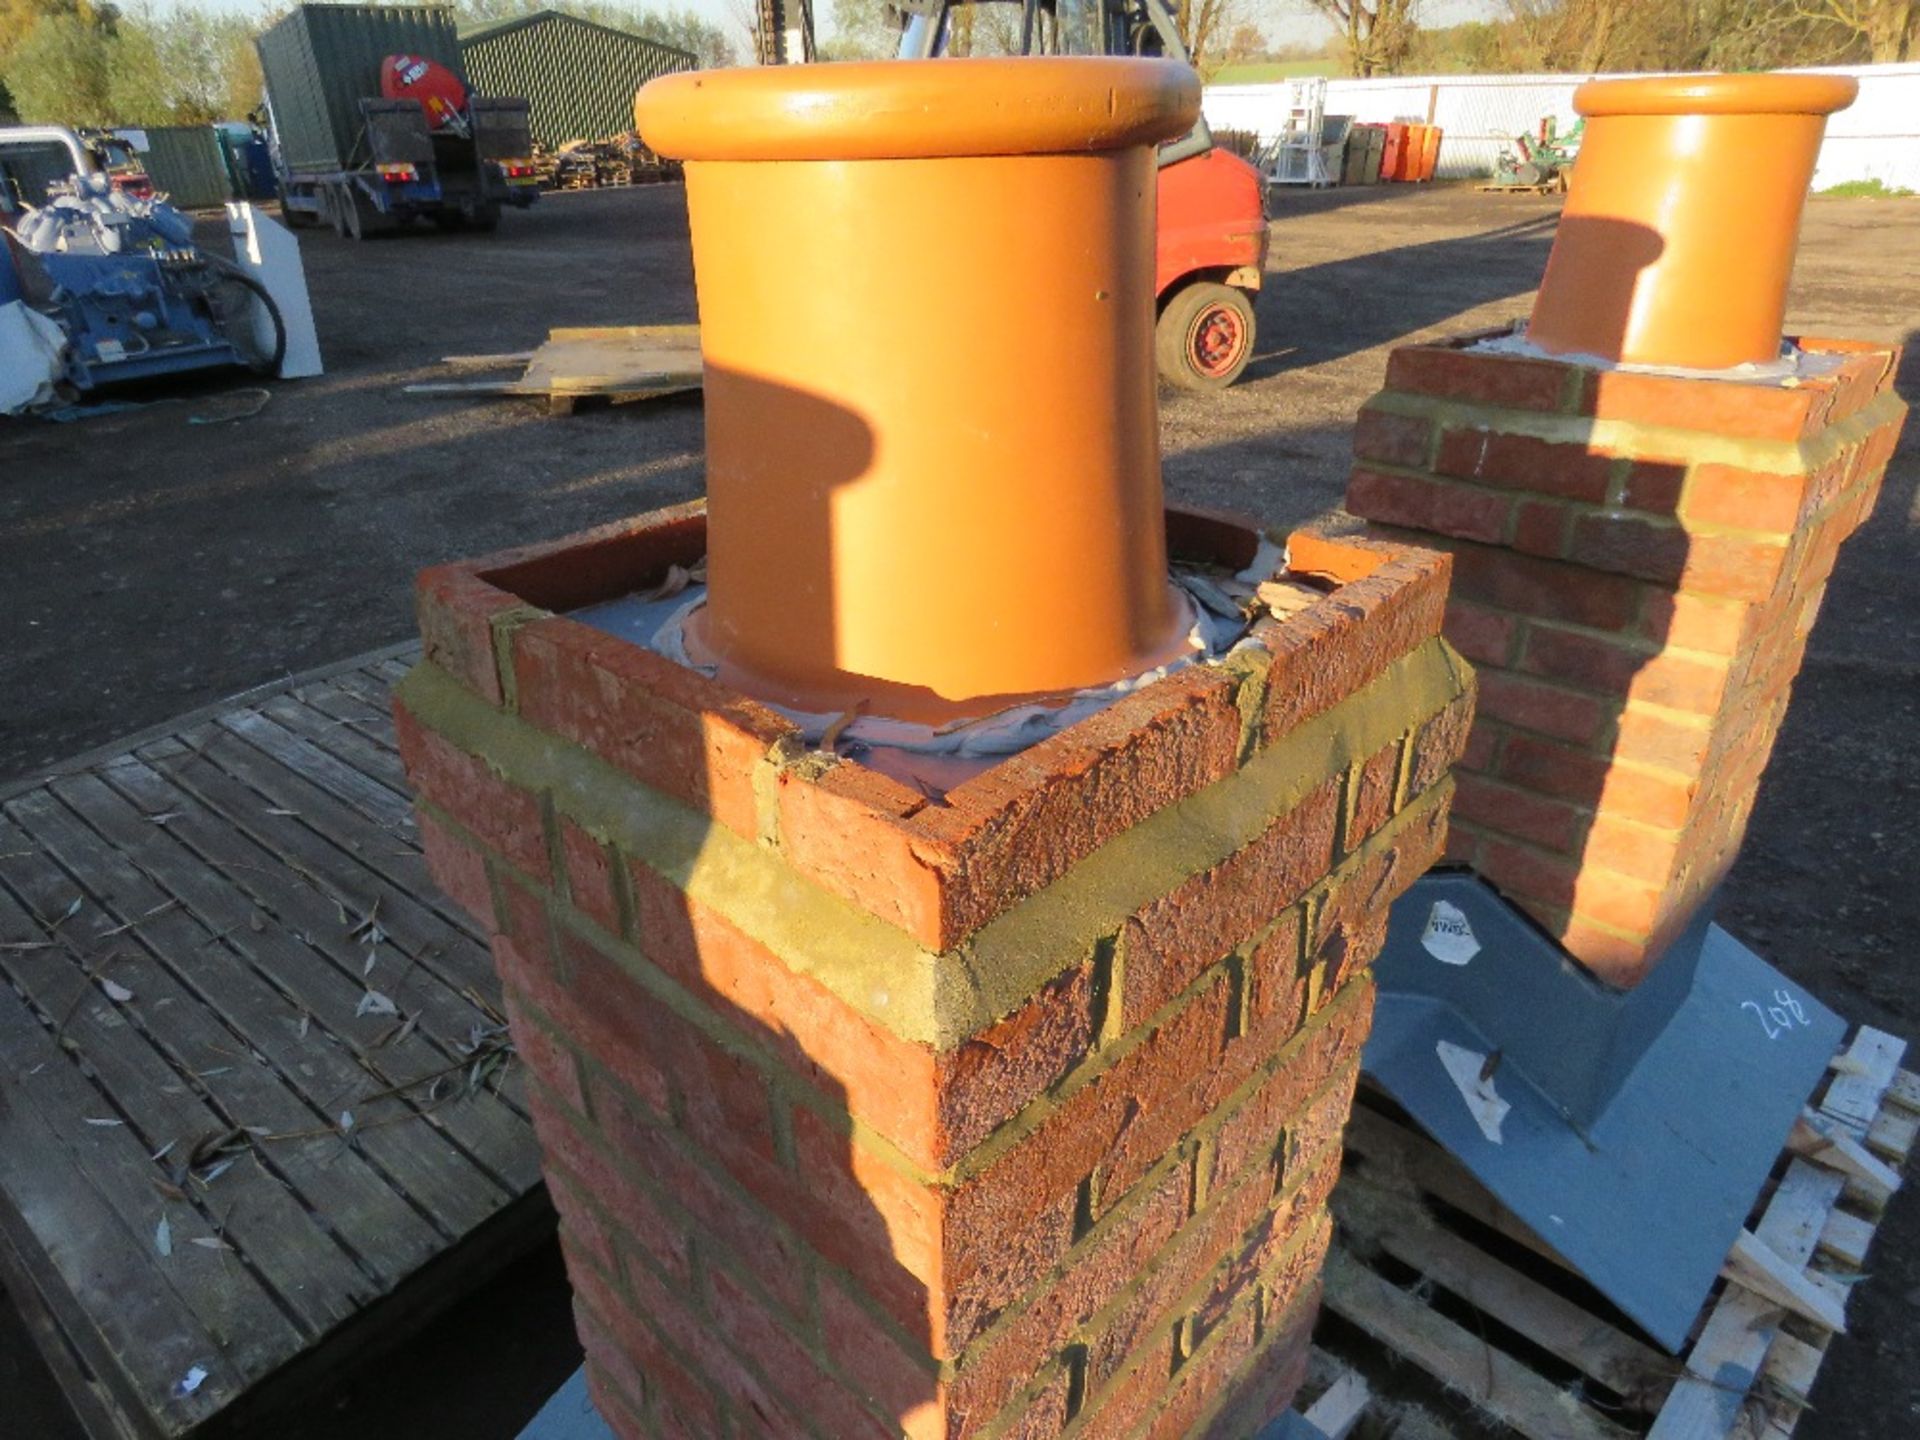 CGFMA FIBRE GLASS CHIMNEY STACK. GRP CENTRE AND BASE WITH REAL BRICK FACING. BELIEVED TO BE 25 DEGRE - Image 2 of 3